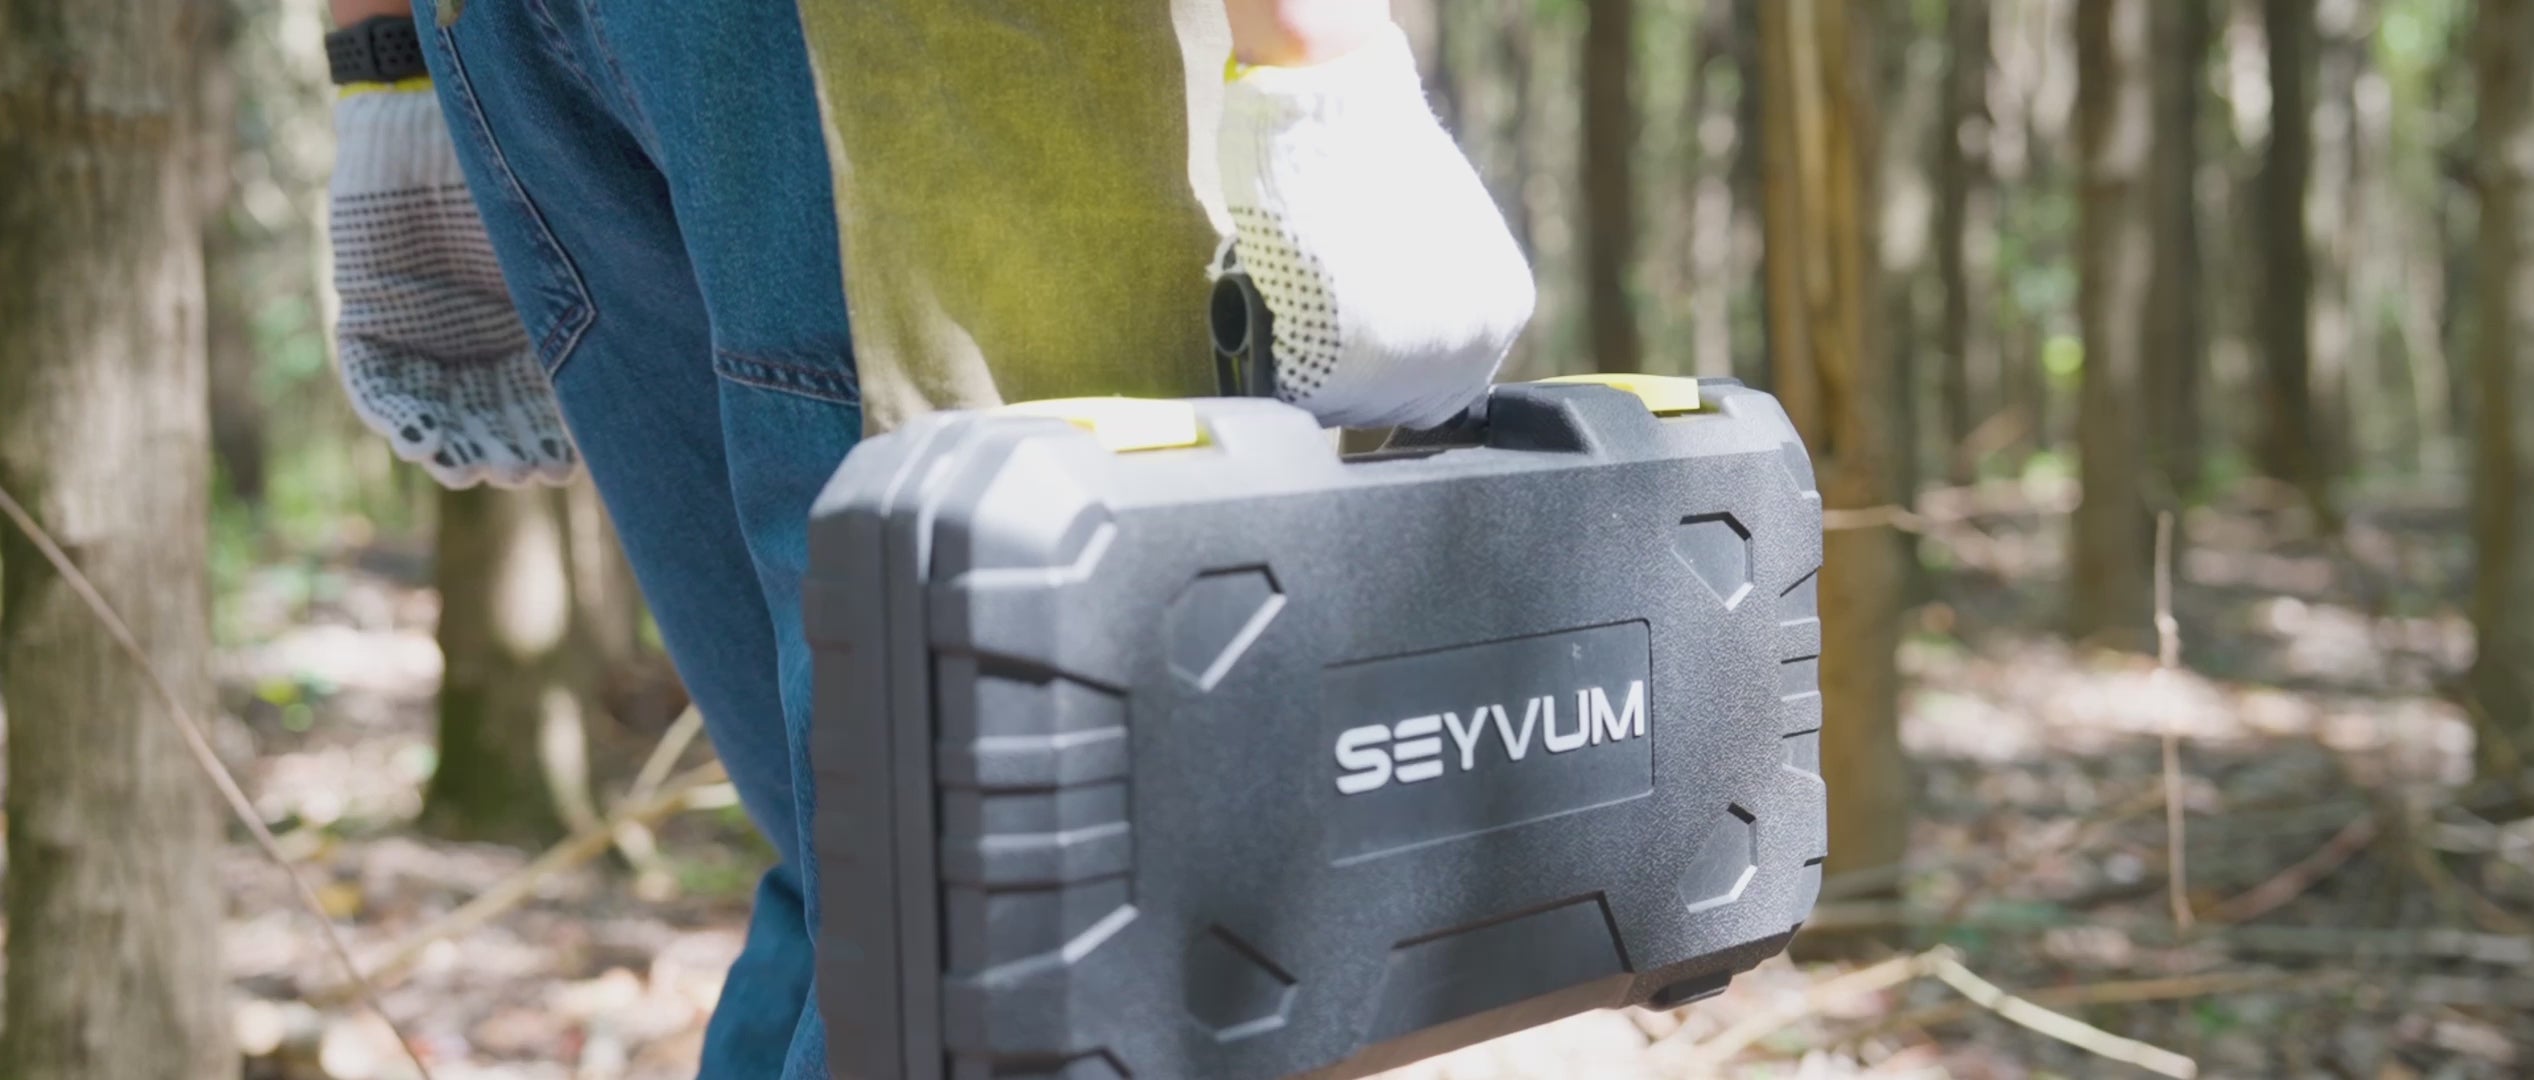 Load video: This is a video about SEYVUM tools.